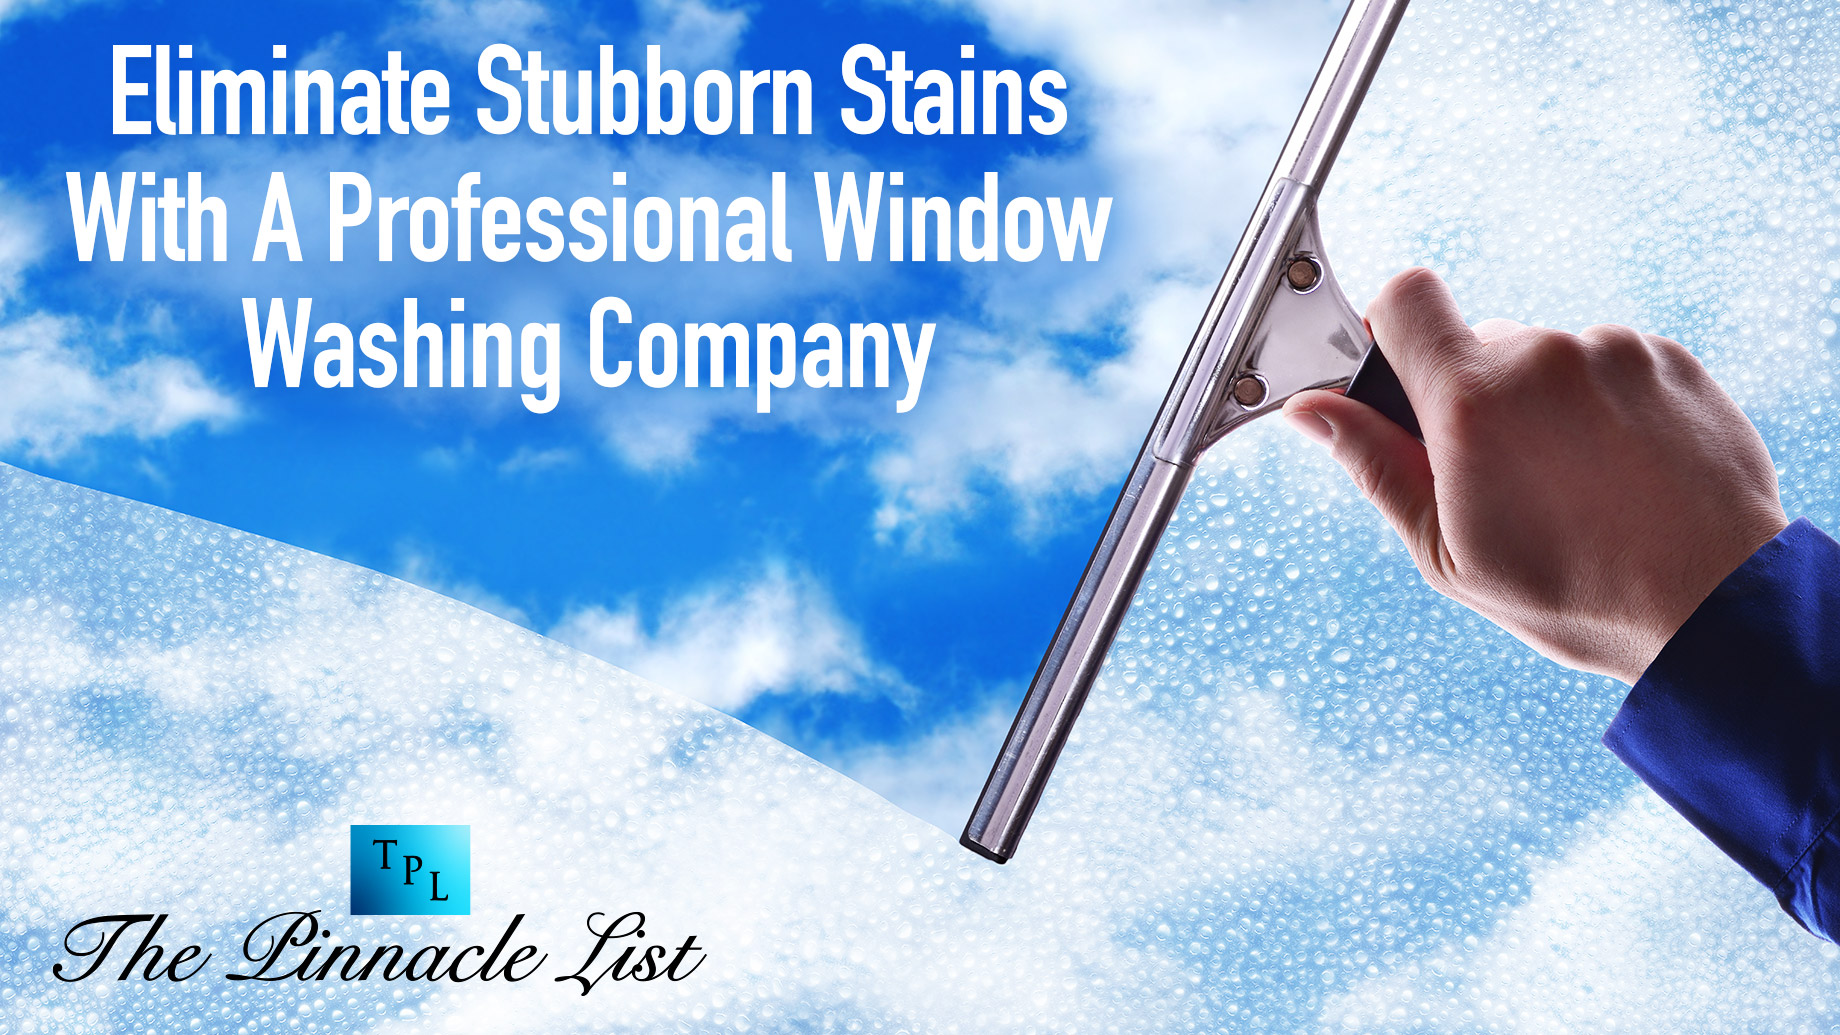 Eliminate Stubborn Stains With A Professional Window Washing Company